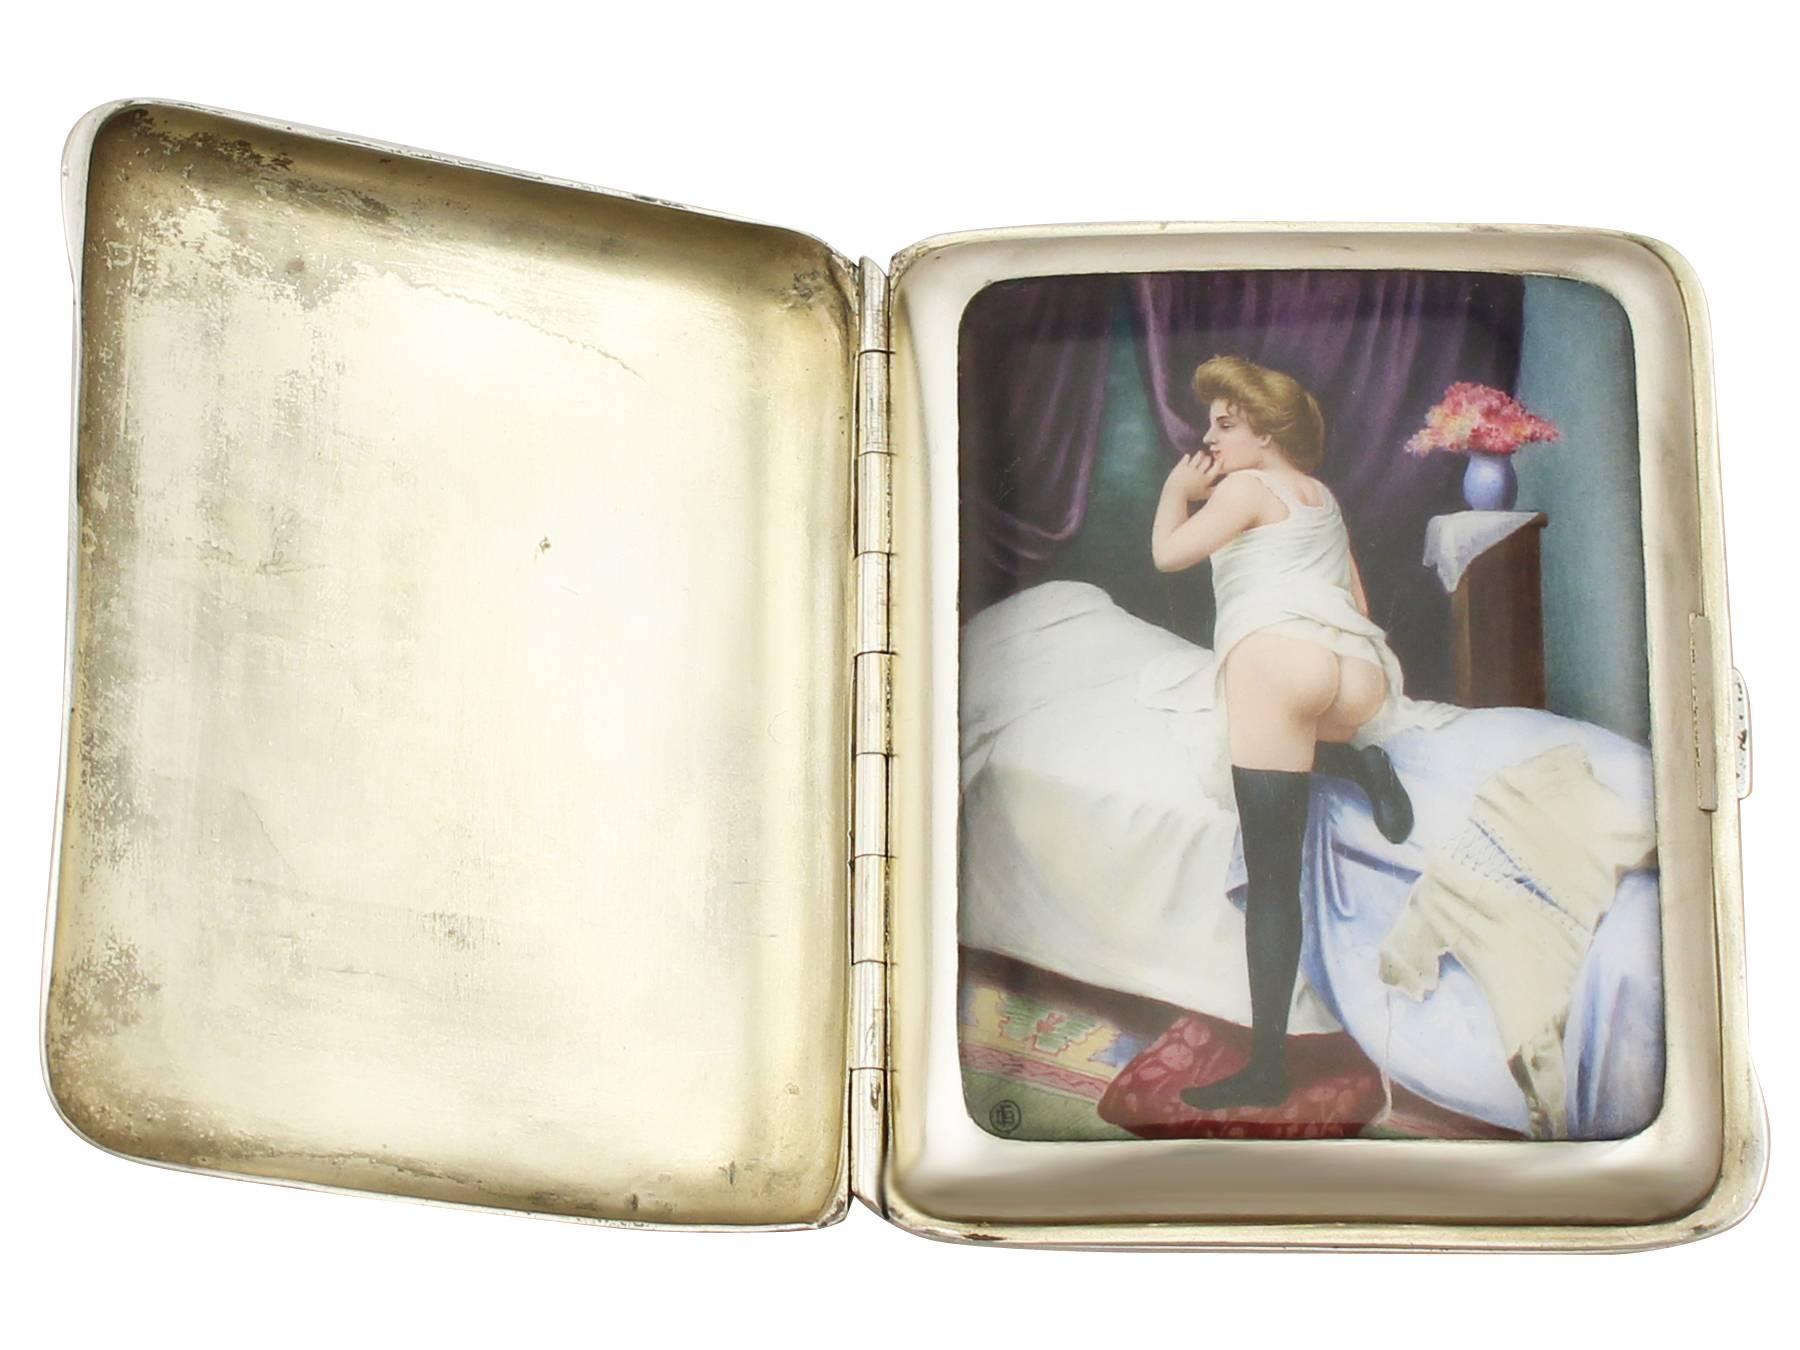 An exceptional, fine and impressive antique Austrian sterling silver and erotica enamel cigarette case; an addition to our diverse range of continental silverware.

This exceptional antique Austrian sterling silver erotic cigarette case has a